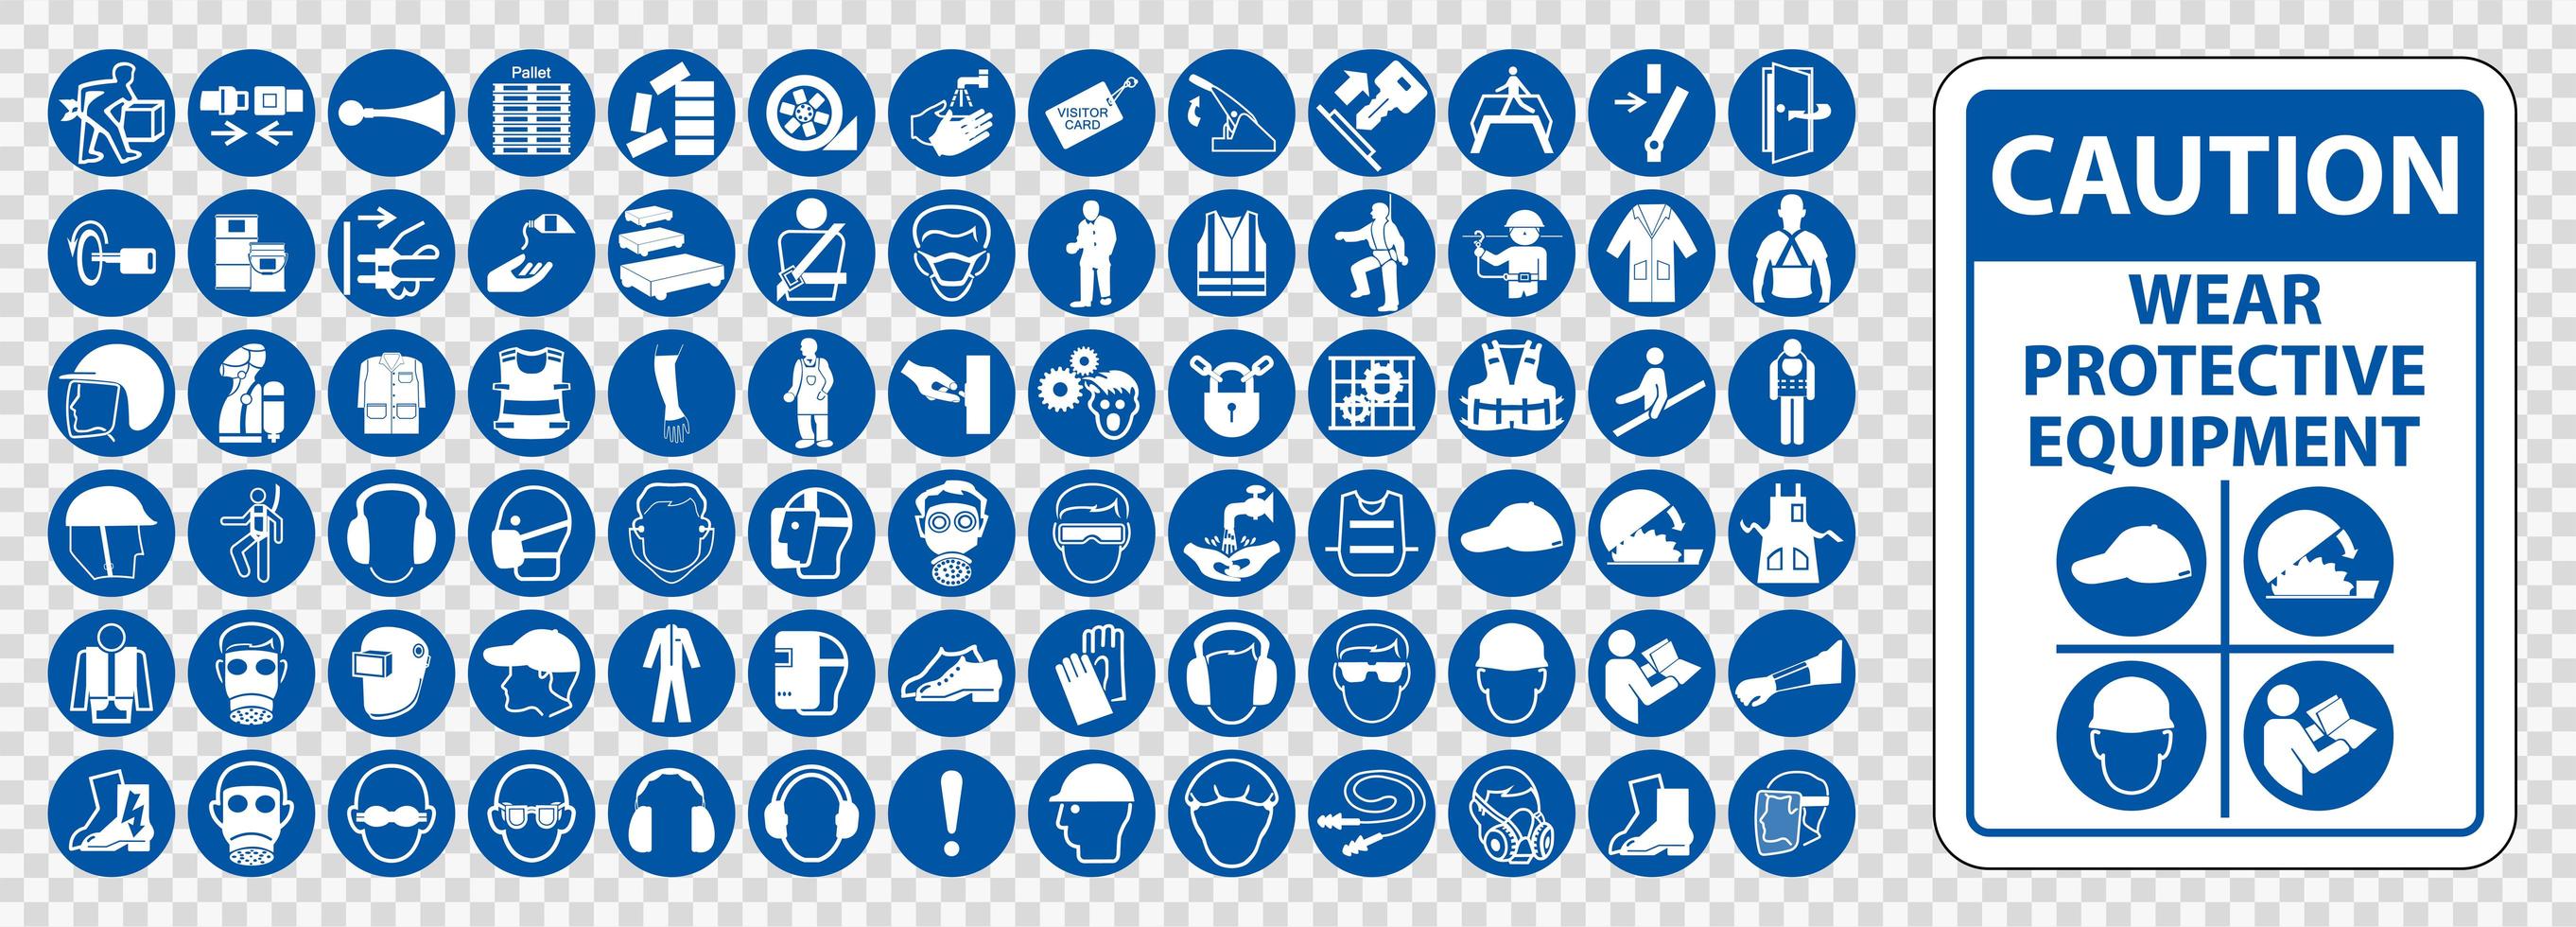 PPE icon set. vector